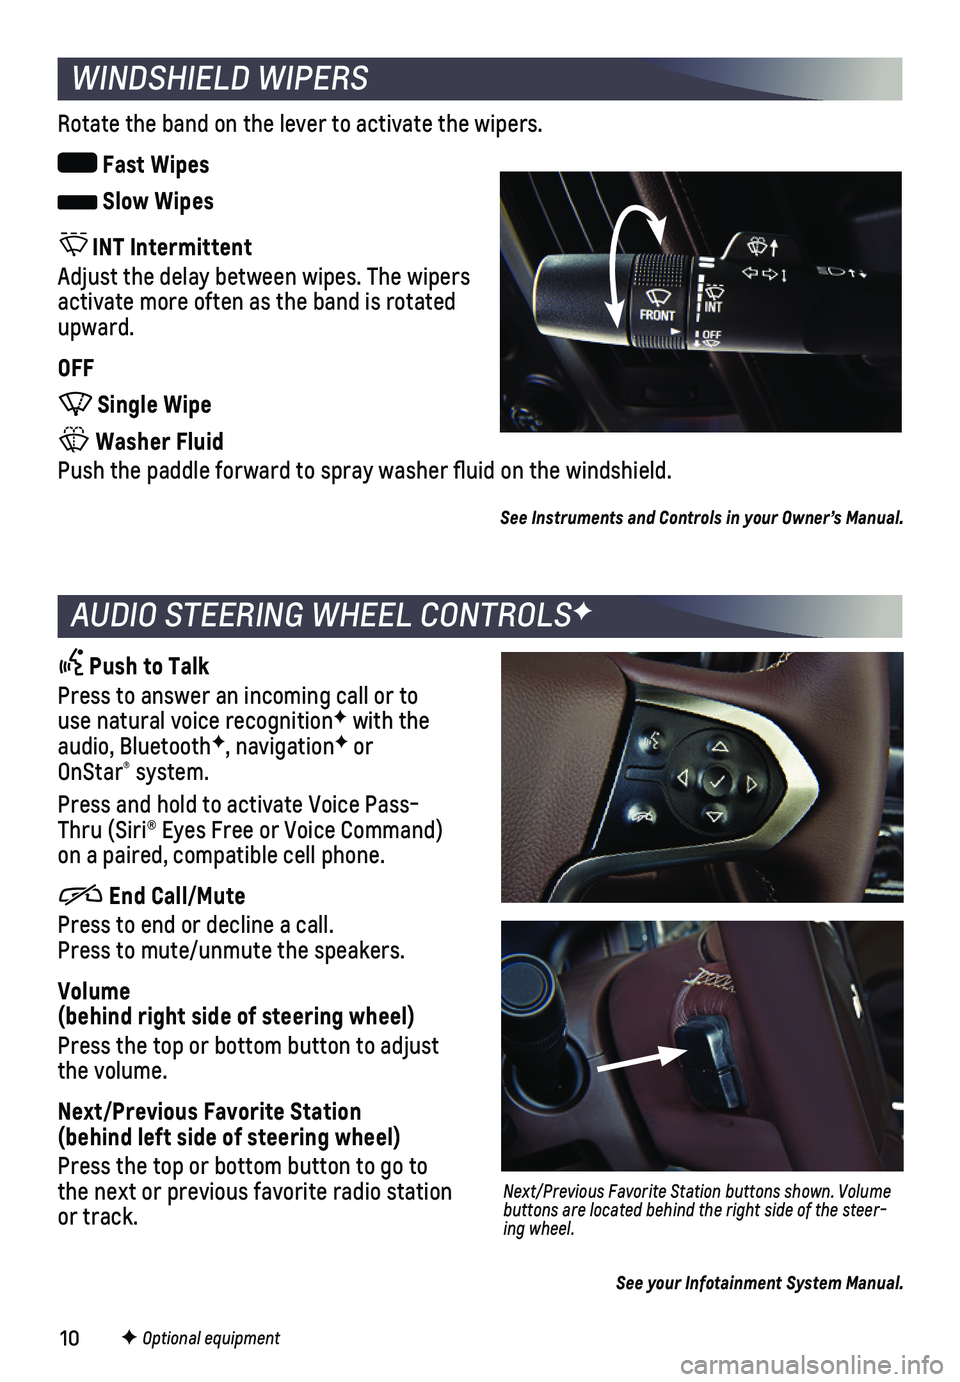 CHEVROLET SILVERADO 1500 LD 2019  Get To Know Guide 10
WINDSHIELD WIPERS
Rotate the band on the lever to activate the wipers.
 Fast Wipes
 Slow Wipes 
 INT Intermittent
Adjust the delay between wipes. The  wipers activate more often as the band is ro